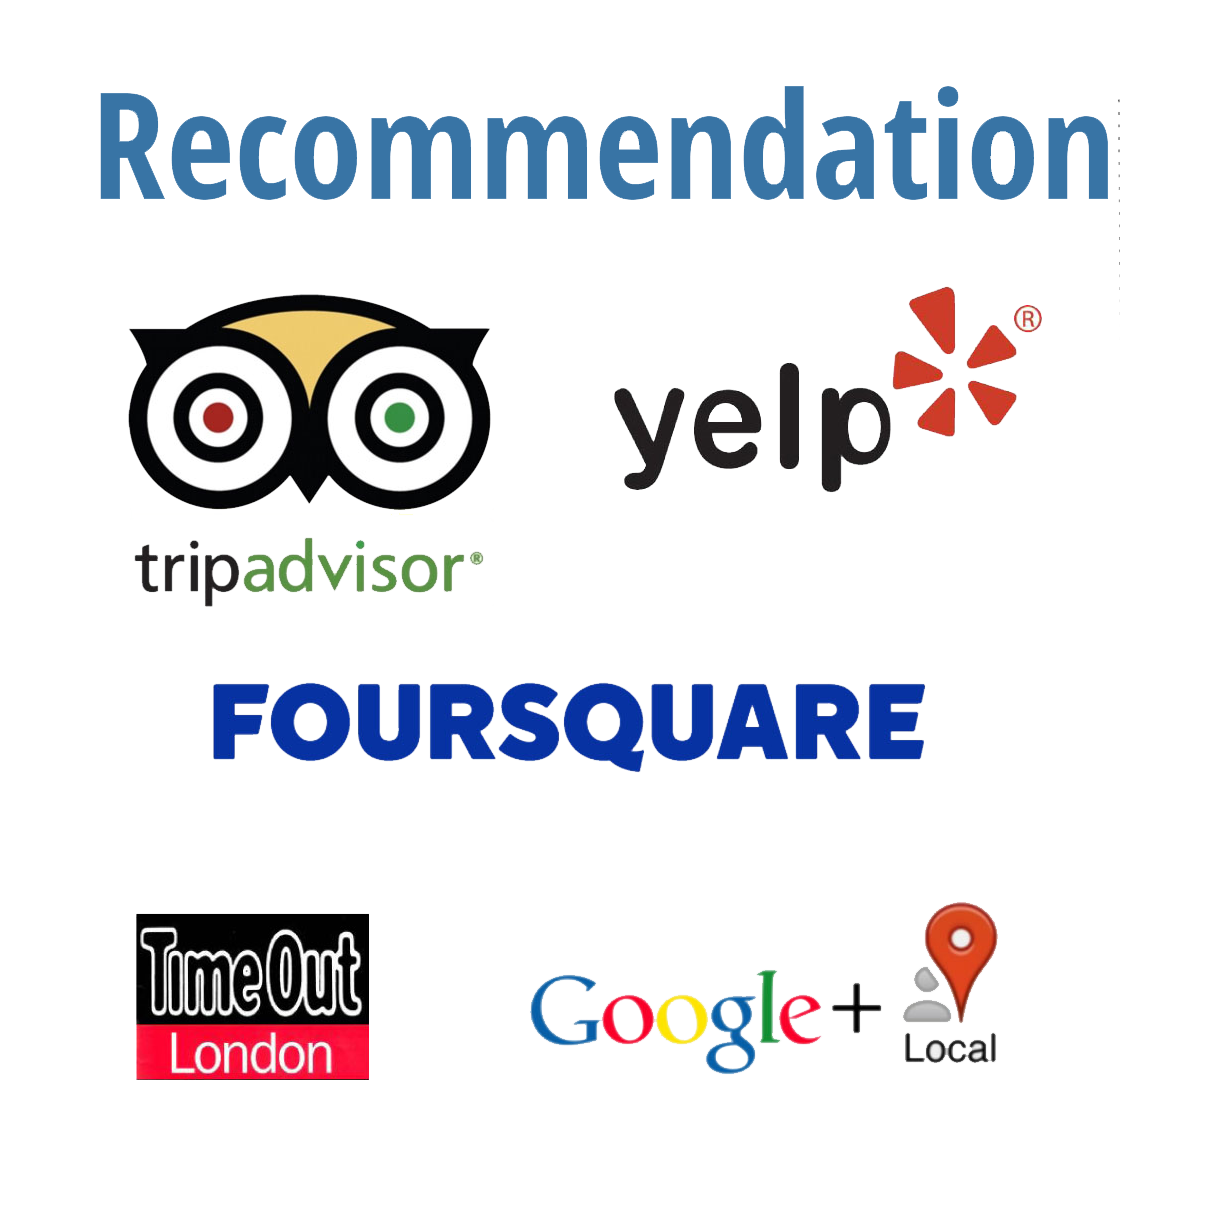 Recommendation space: Tripadviser, Yelp, Foursquare, Time Out, Google